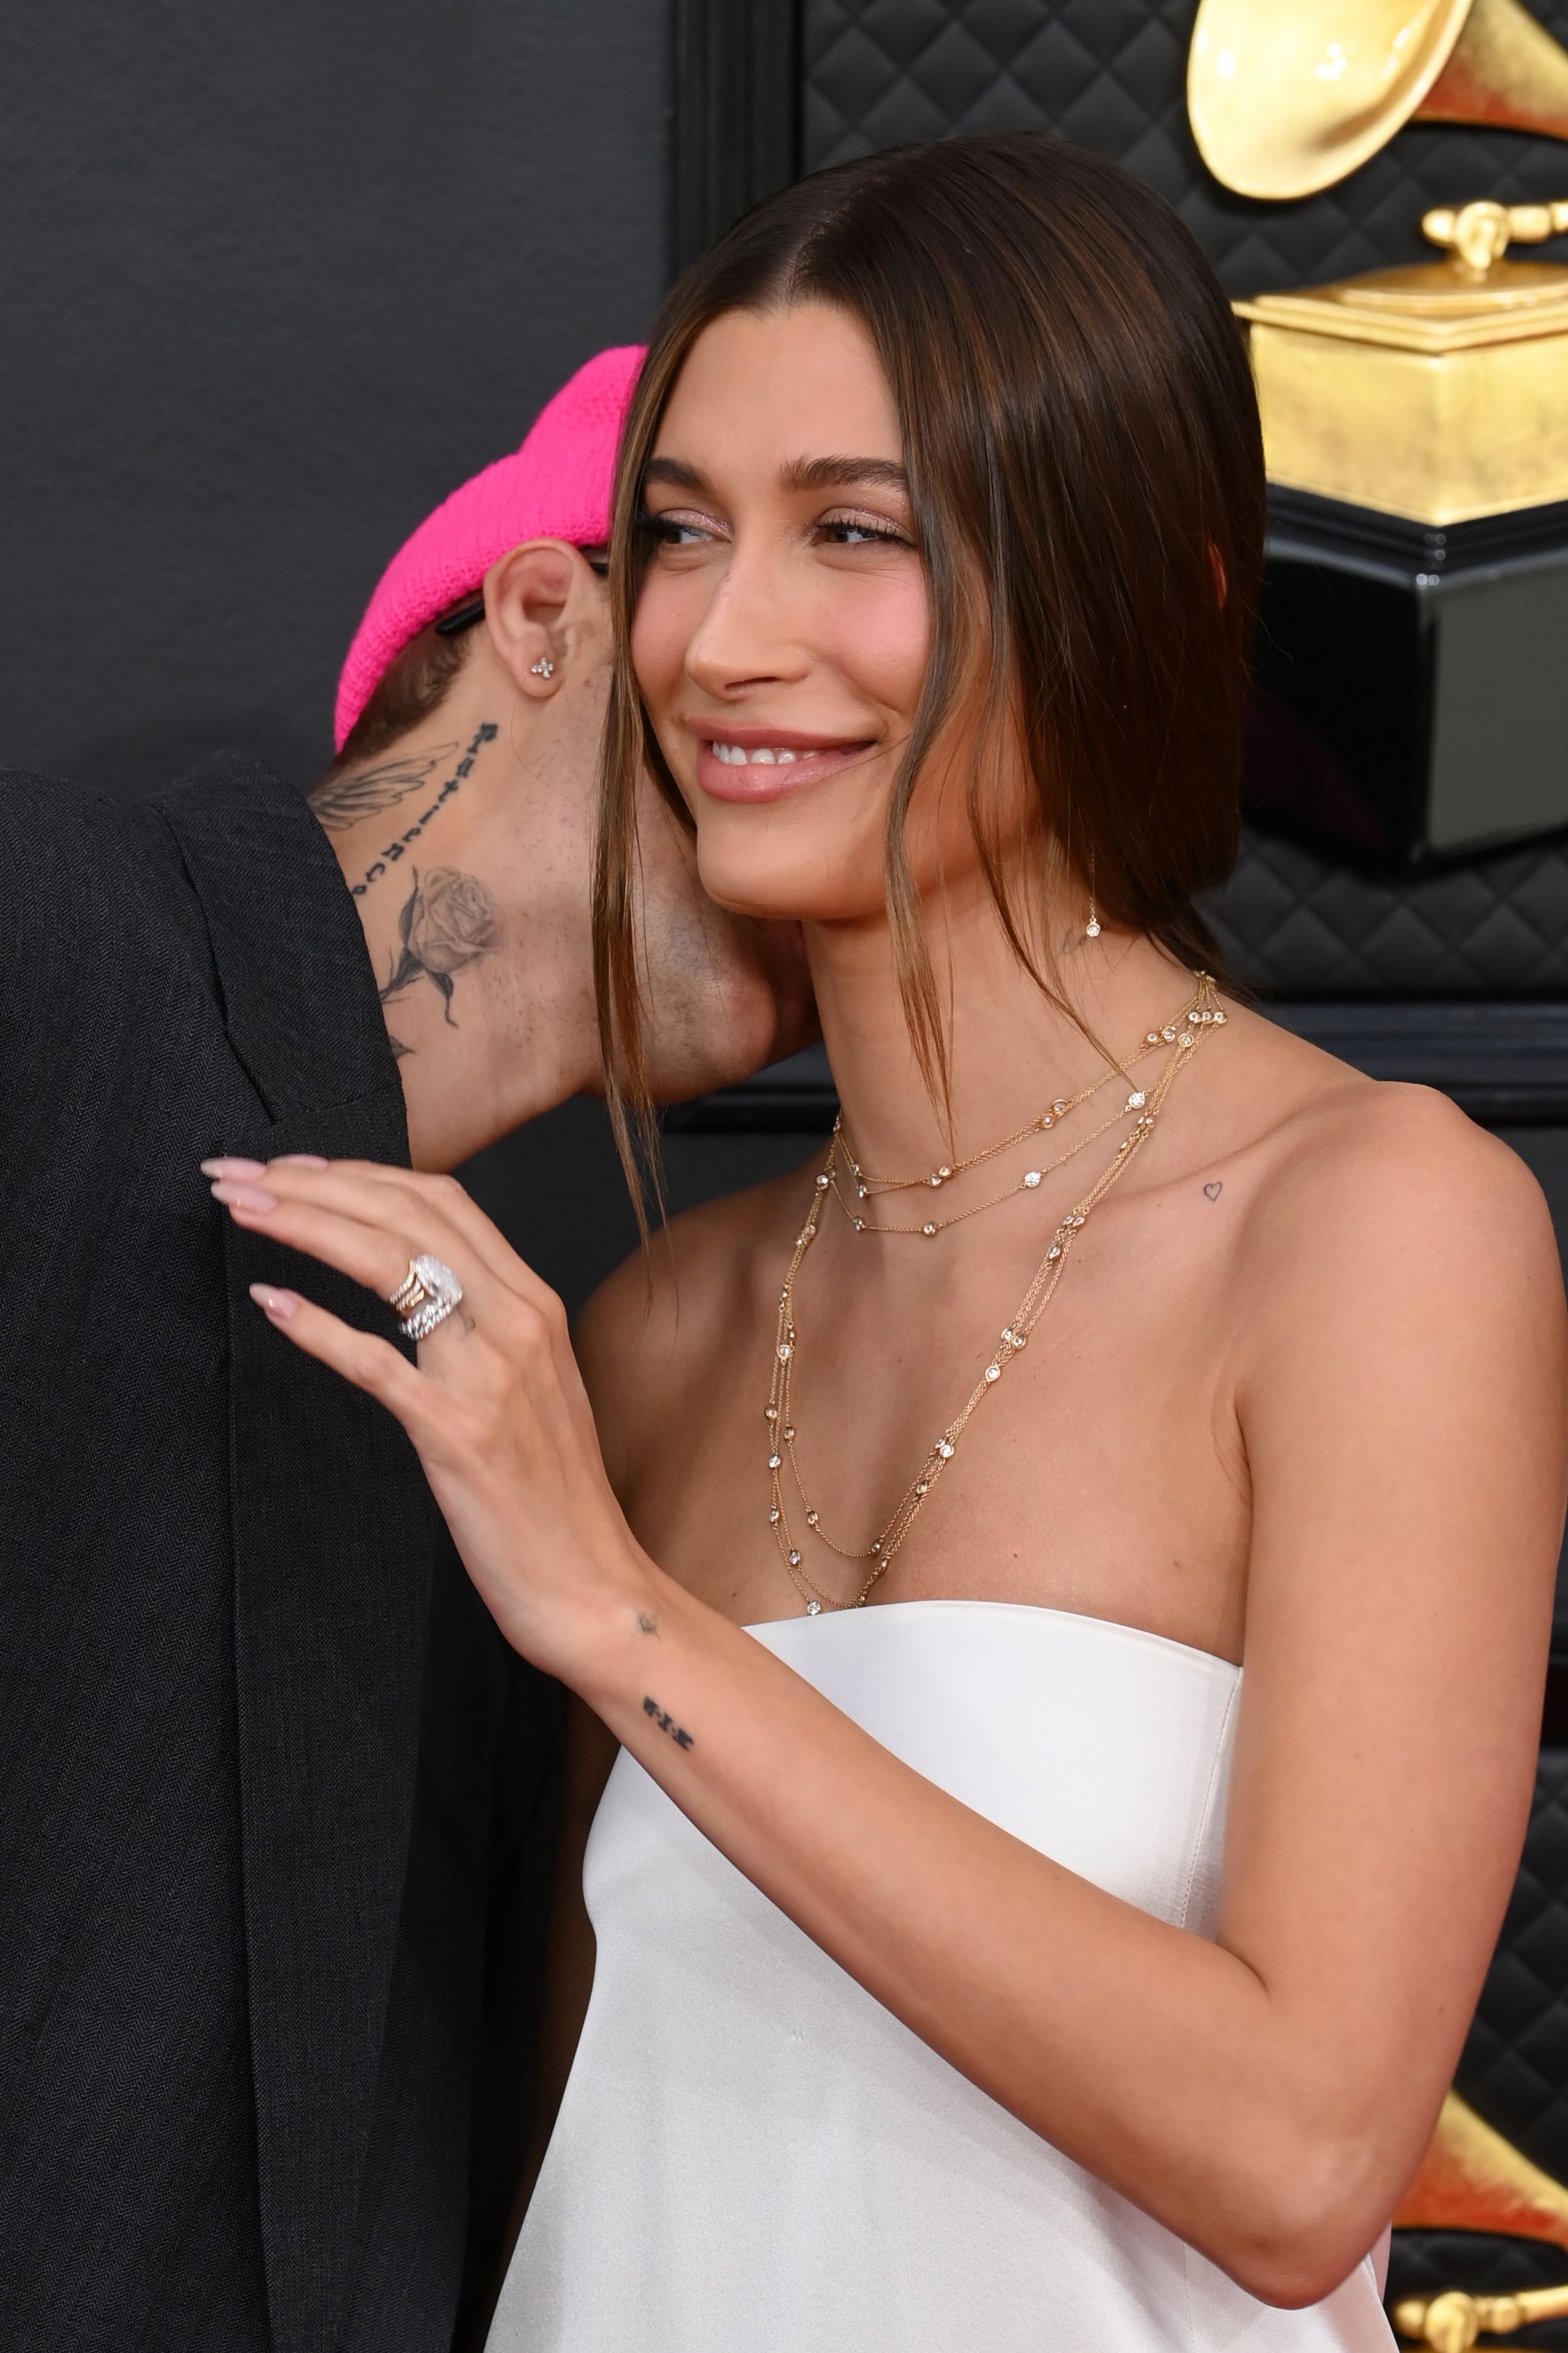 Hailey Baldwin gets new neck tattoo after banning Justin Biebers